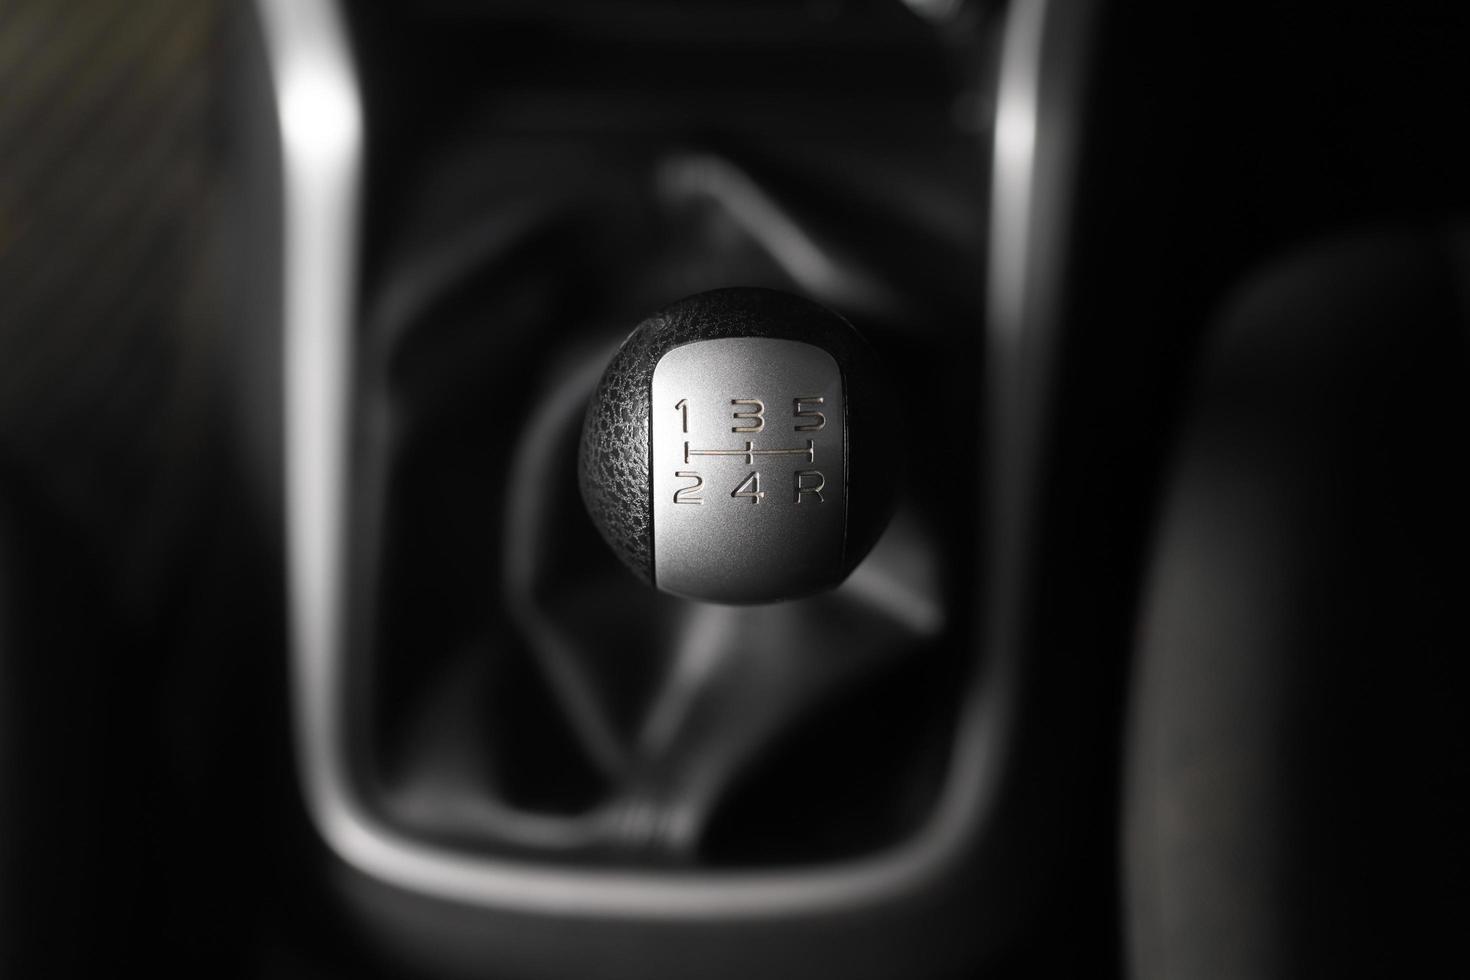 Manual Transmission Driving. Modern Car with control 6 speed gear stick. photo